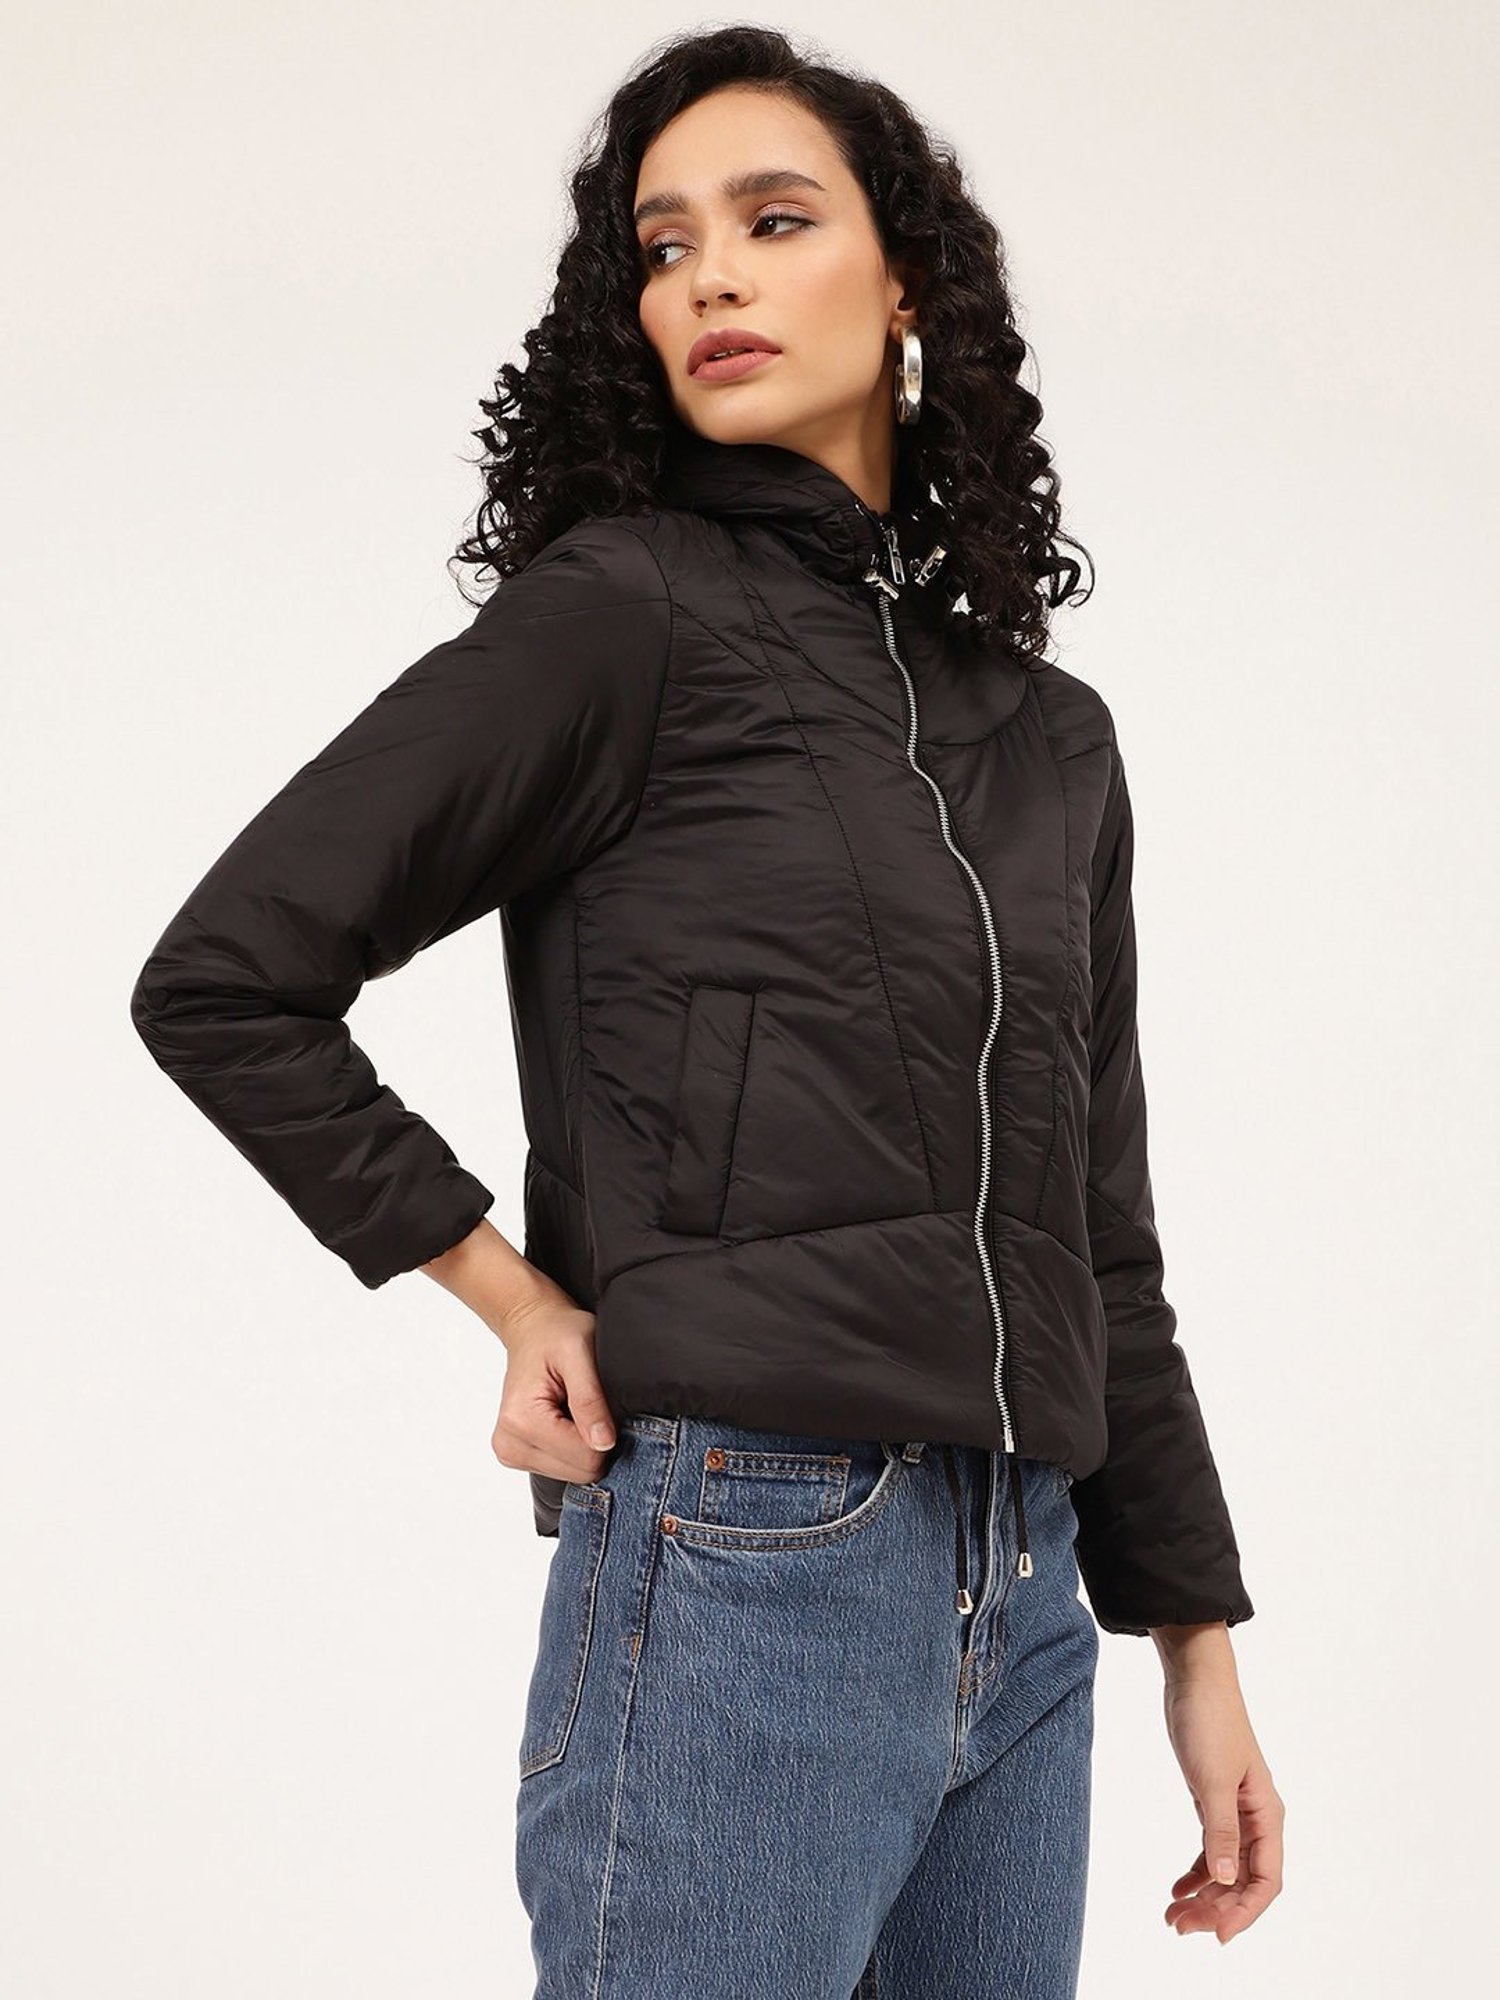 Jackets For Women - Buy Women Fashion Jackets Online at Best Prices In  India | Flipkart.com